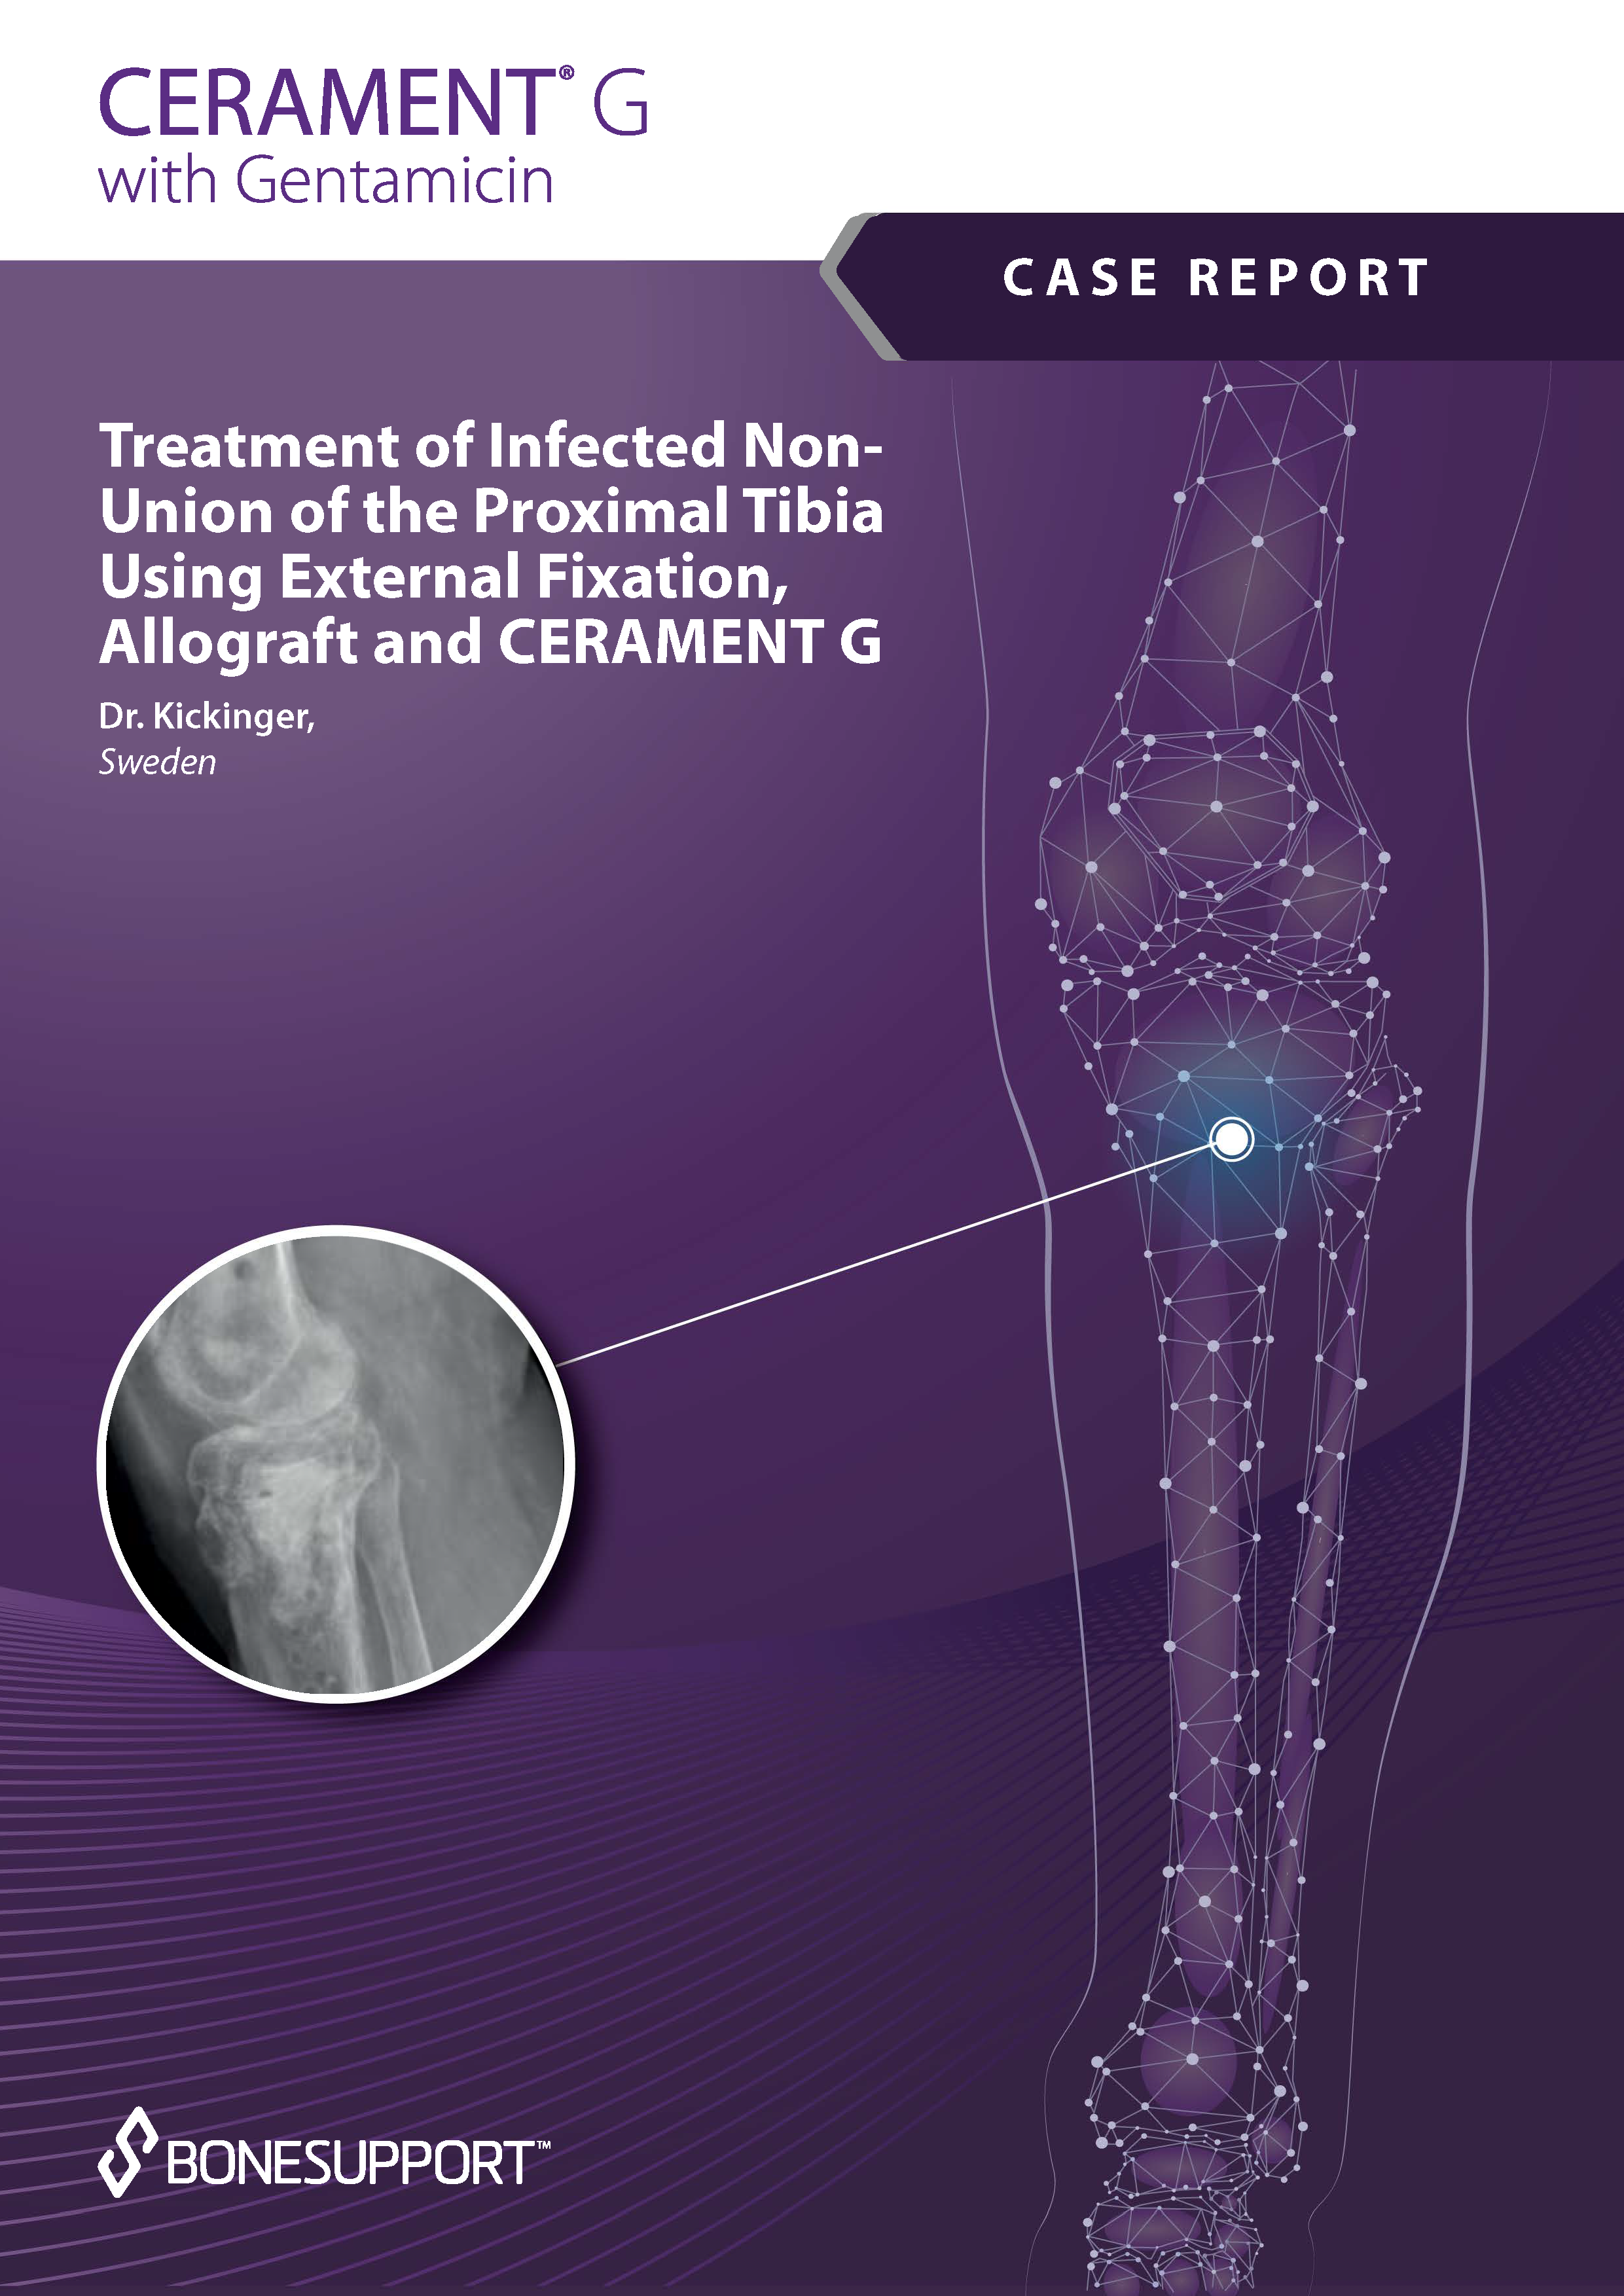 Treatment of infected non-union of the proximal tibia using external fixation, allograft and CERAMENT G